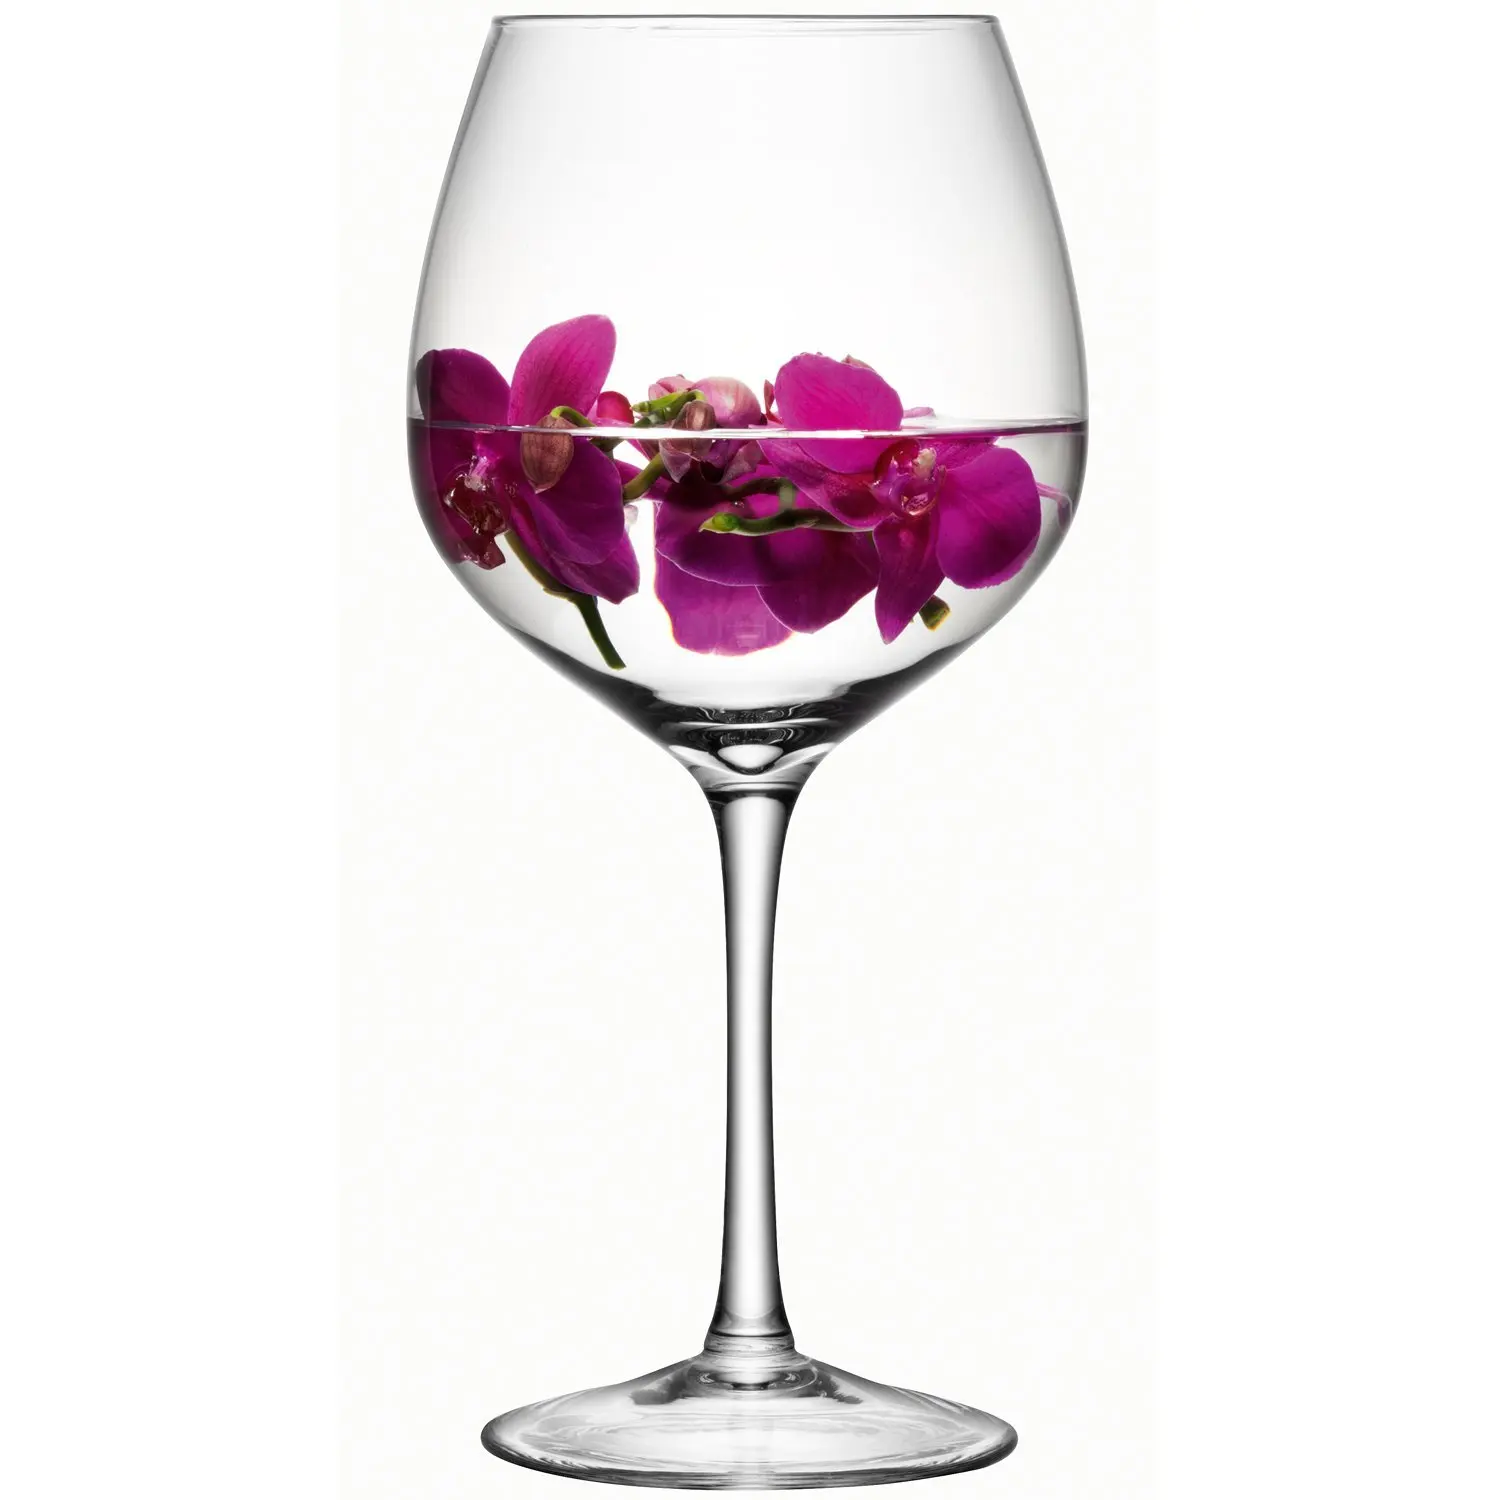 Cheap Giant Wine Glass Centerpiece Find Giant Wine Glass Centerpiece